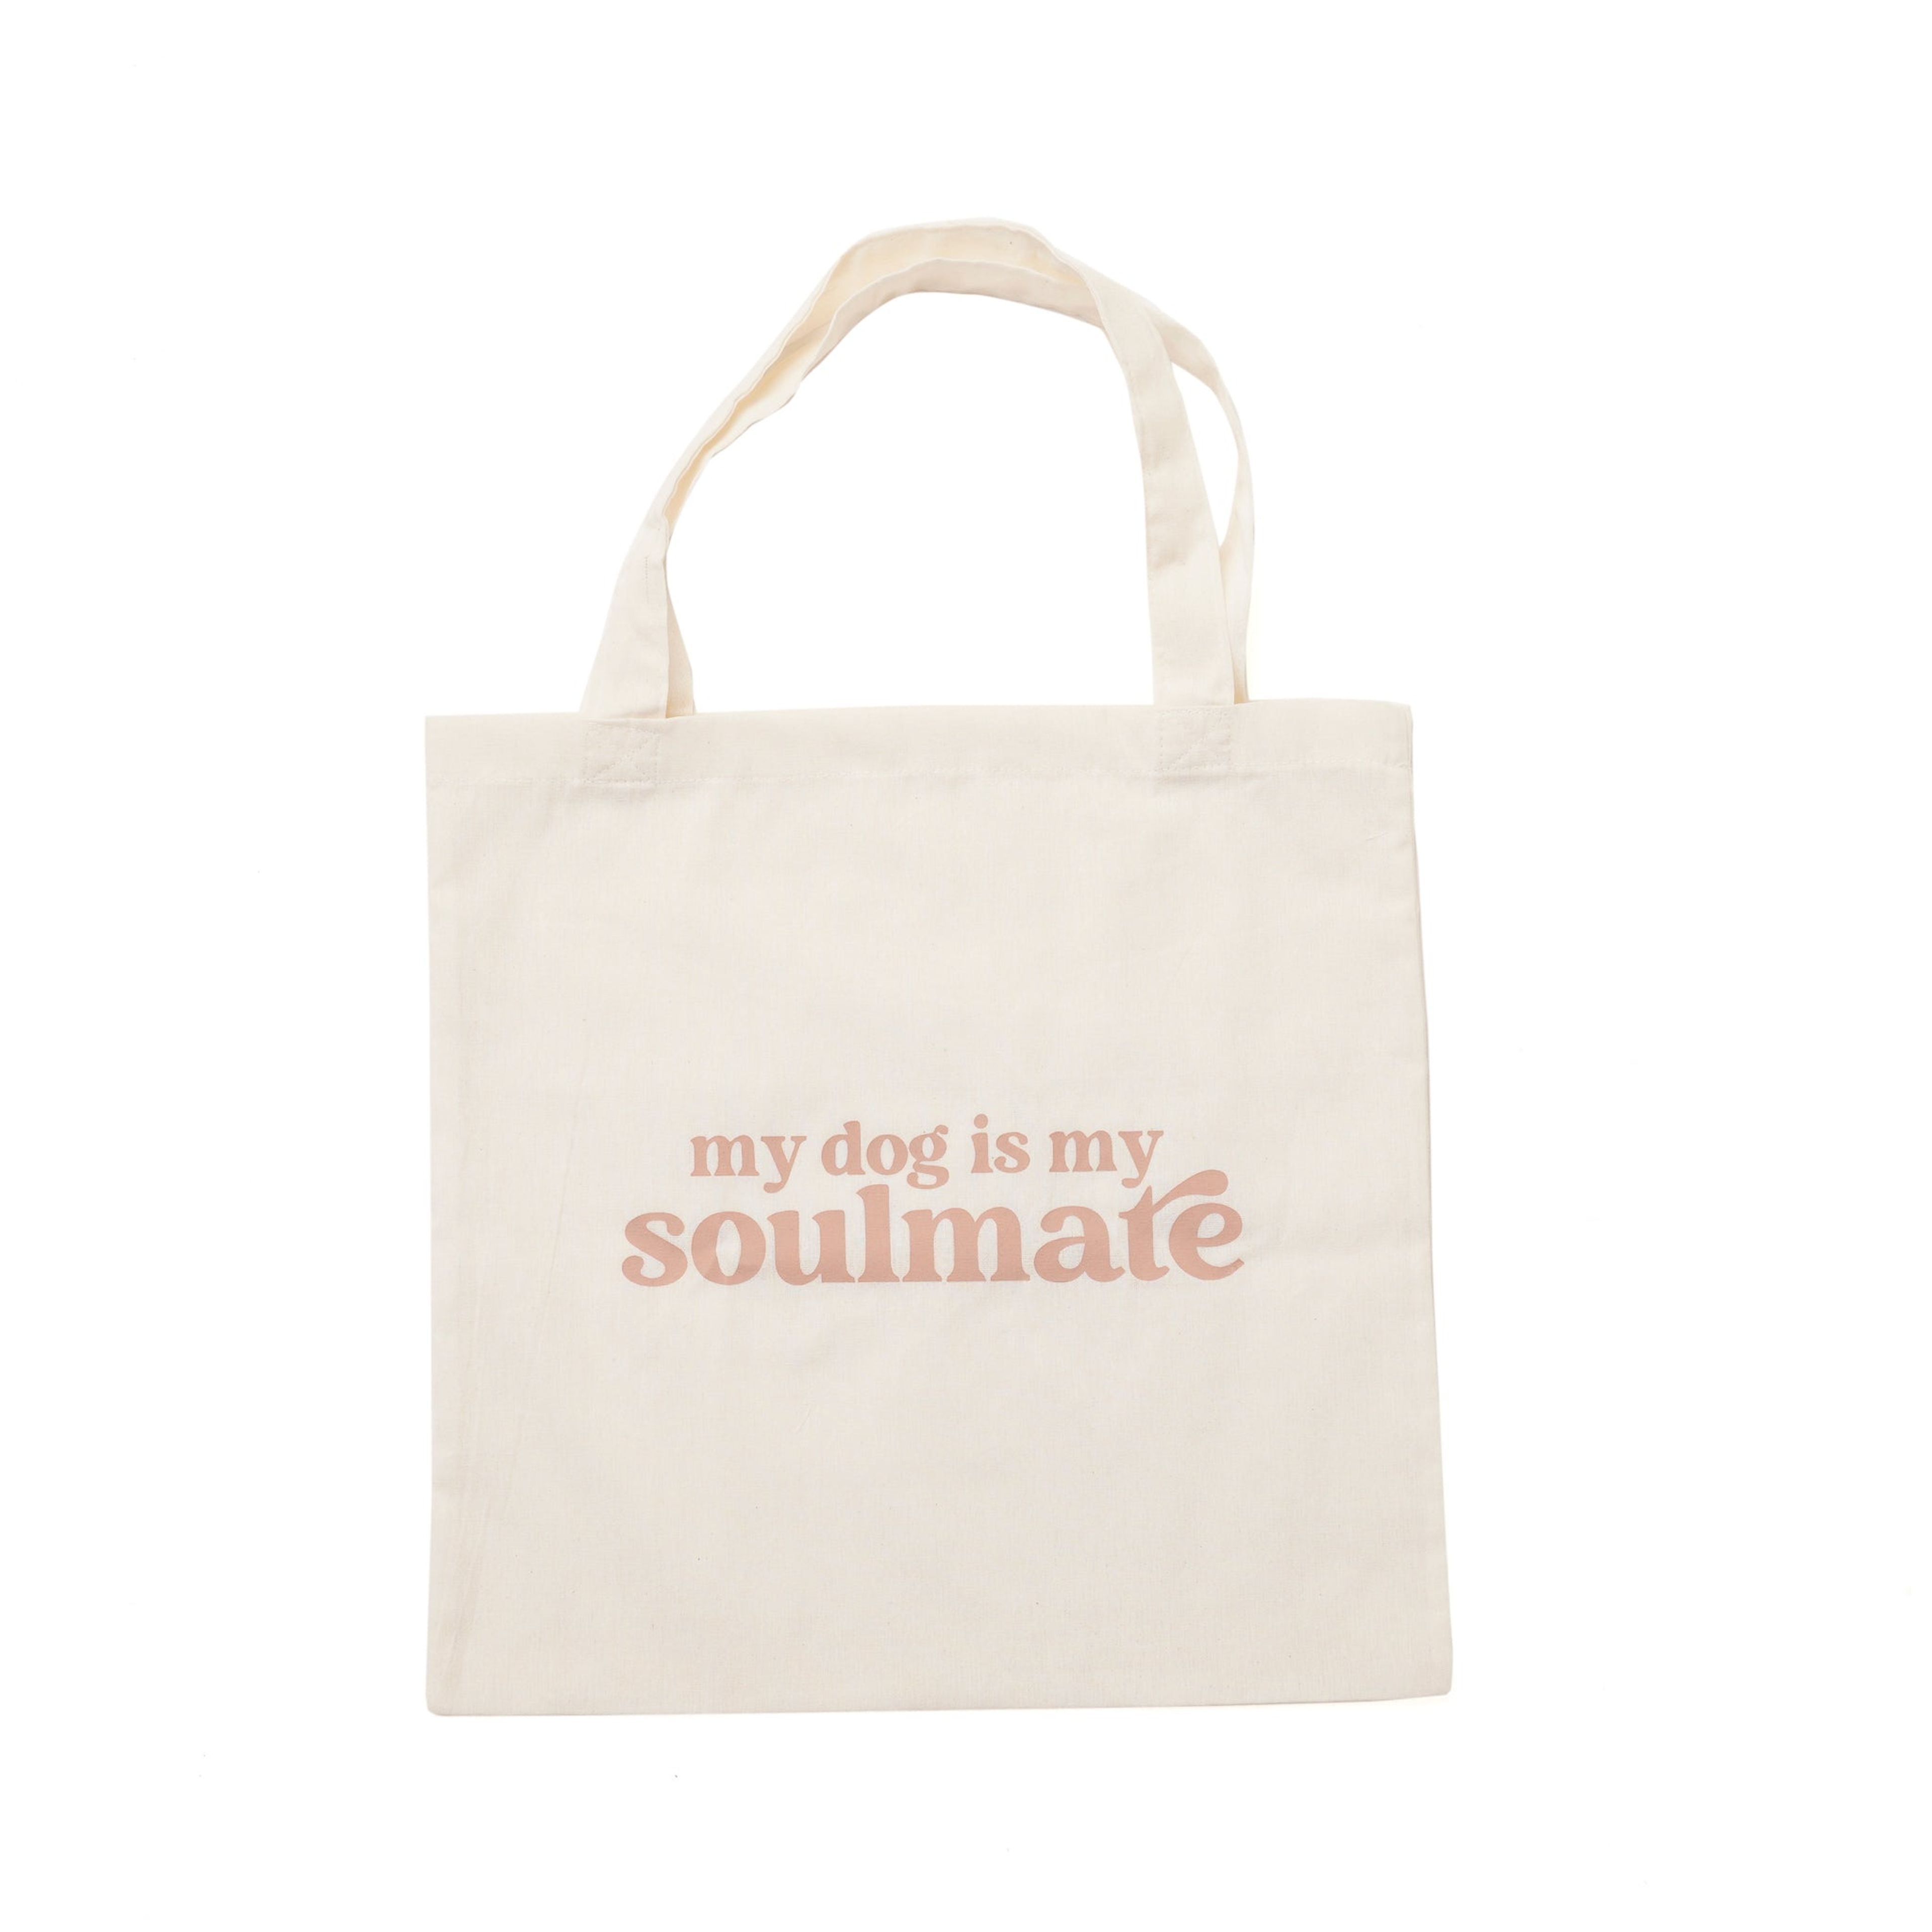 My dog is my soulmate - Tote